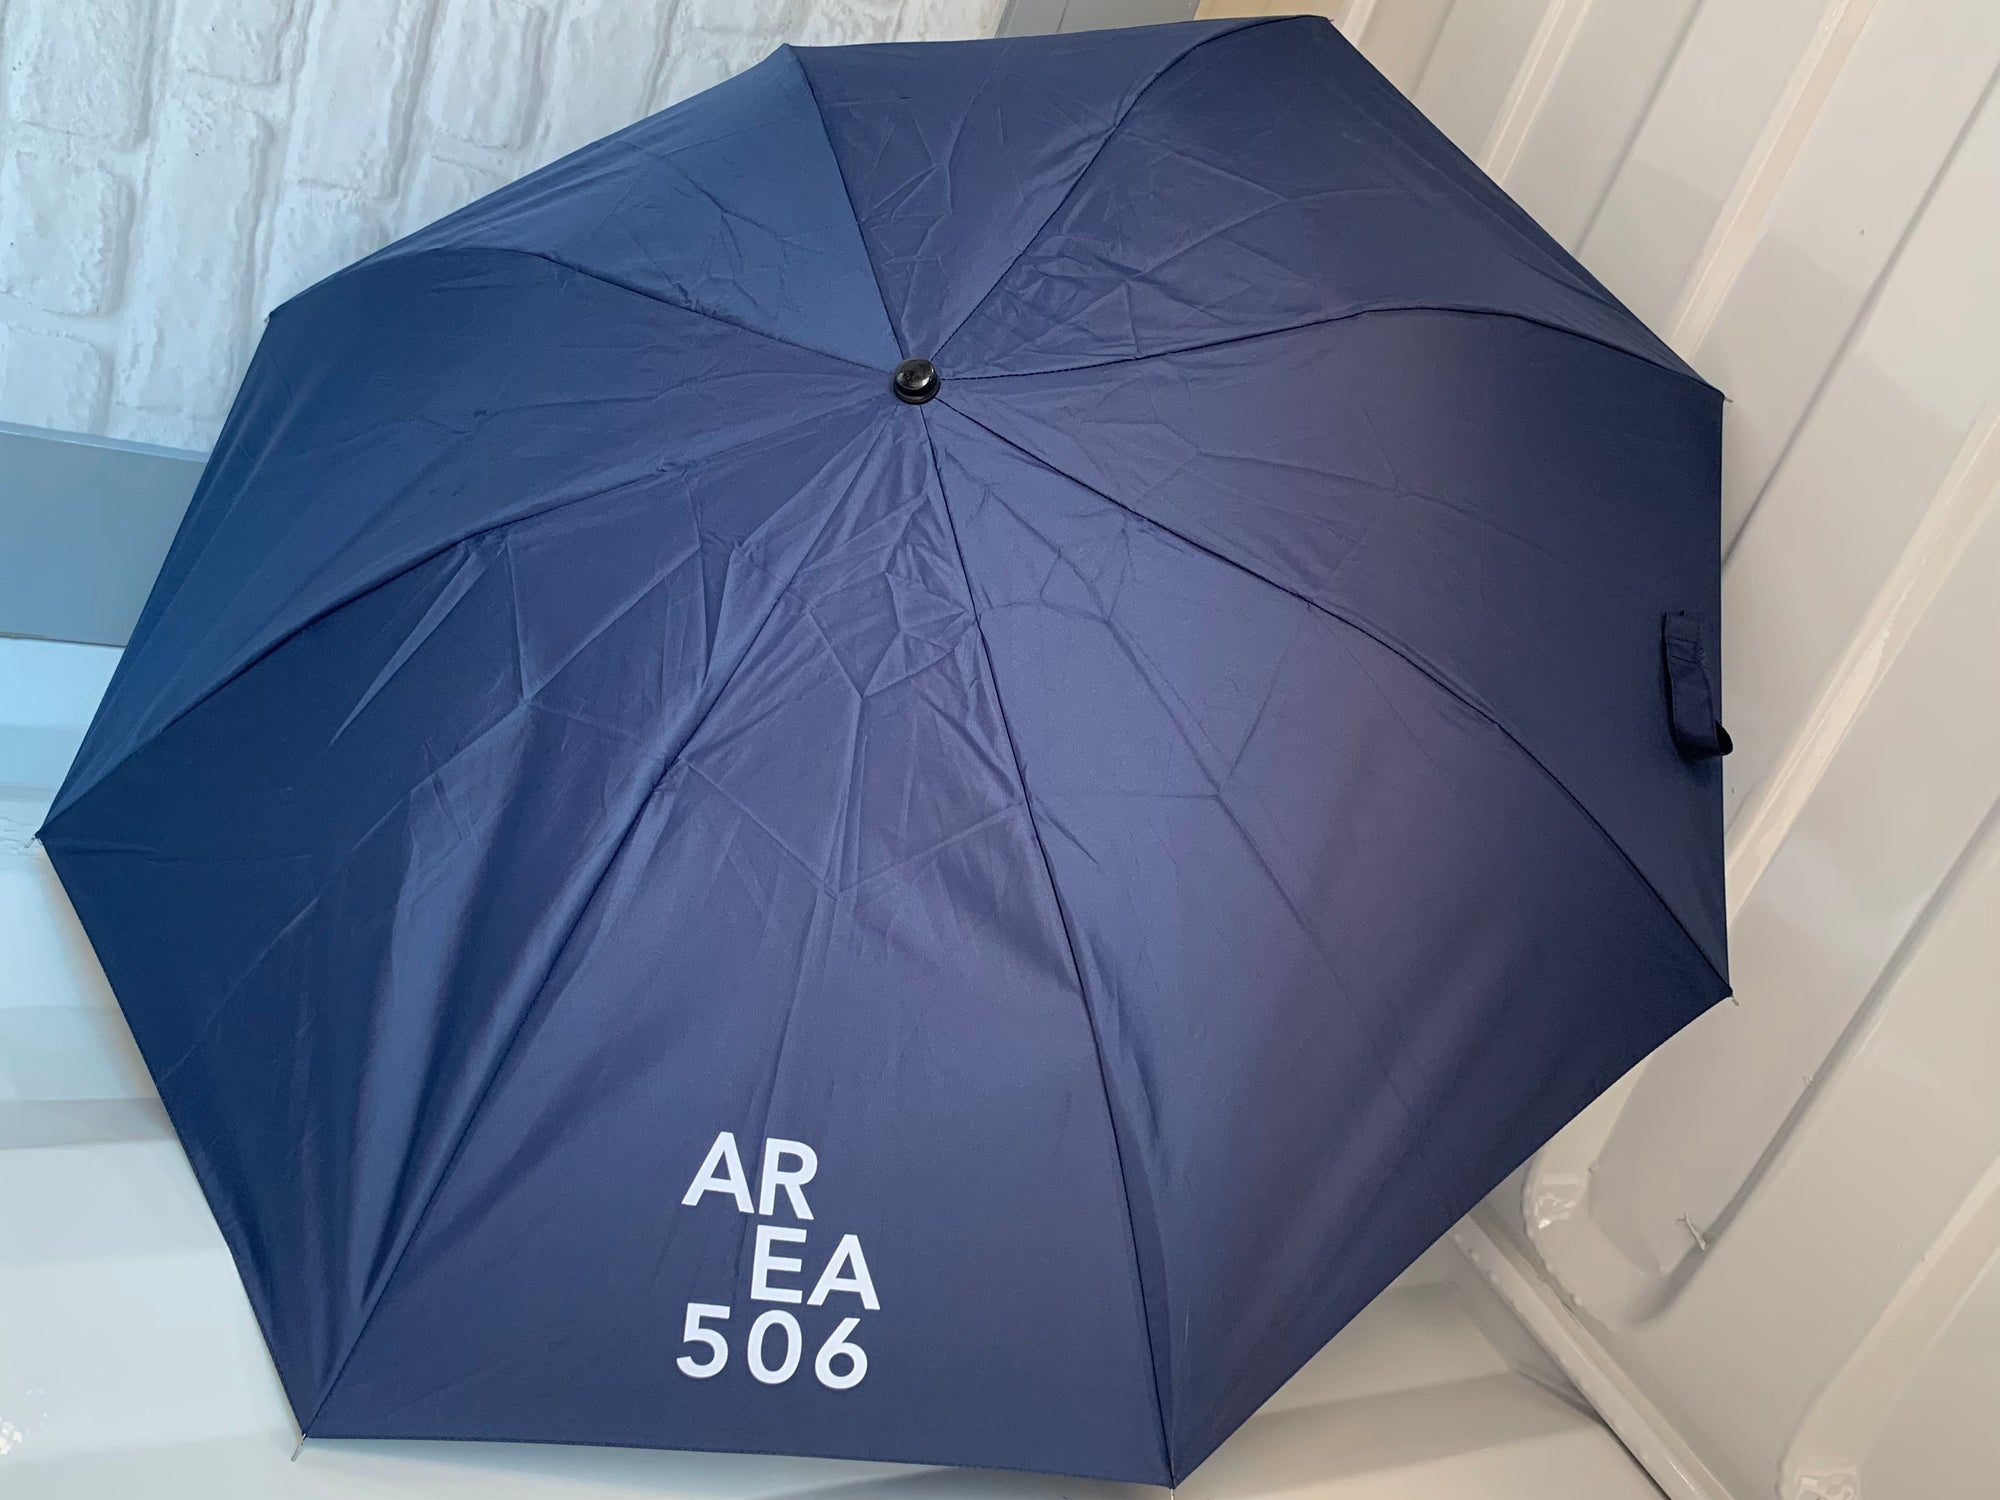 Navy blue umbrella with a white AREA 506 logo screened on one panel.